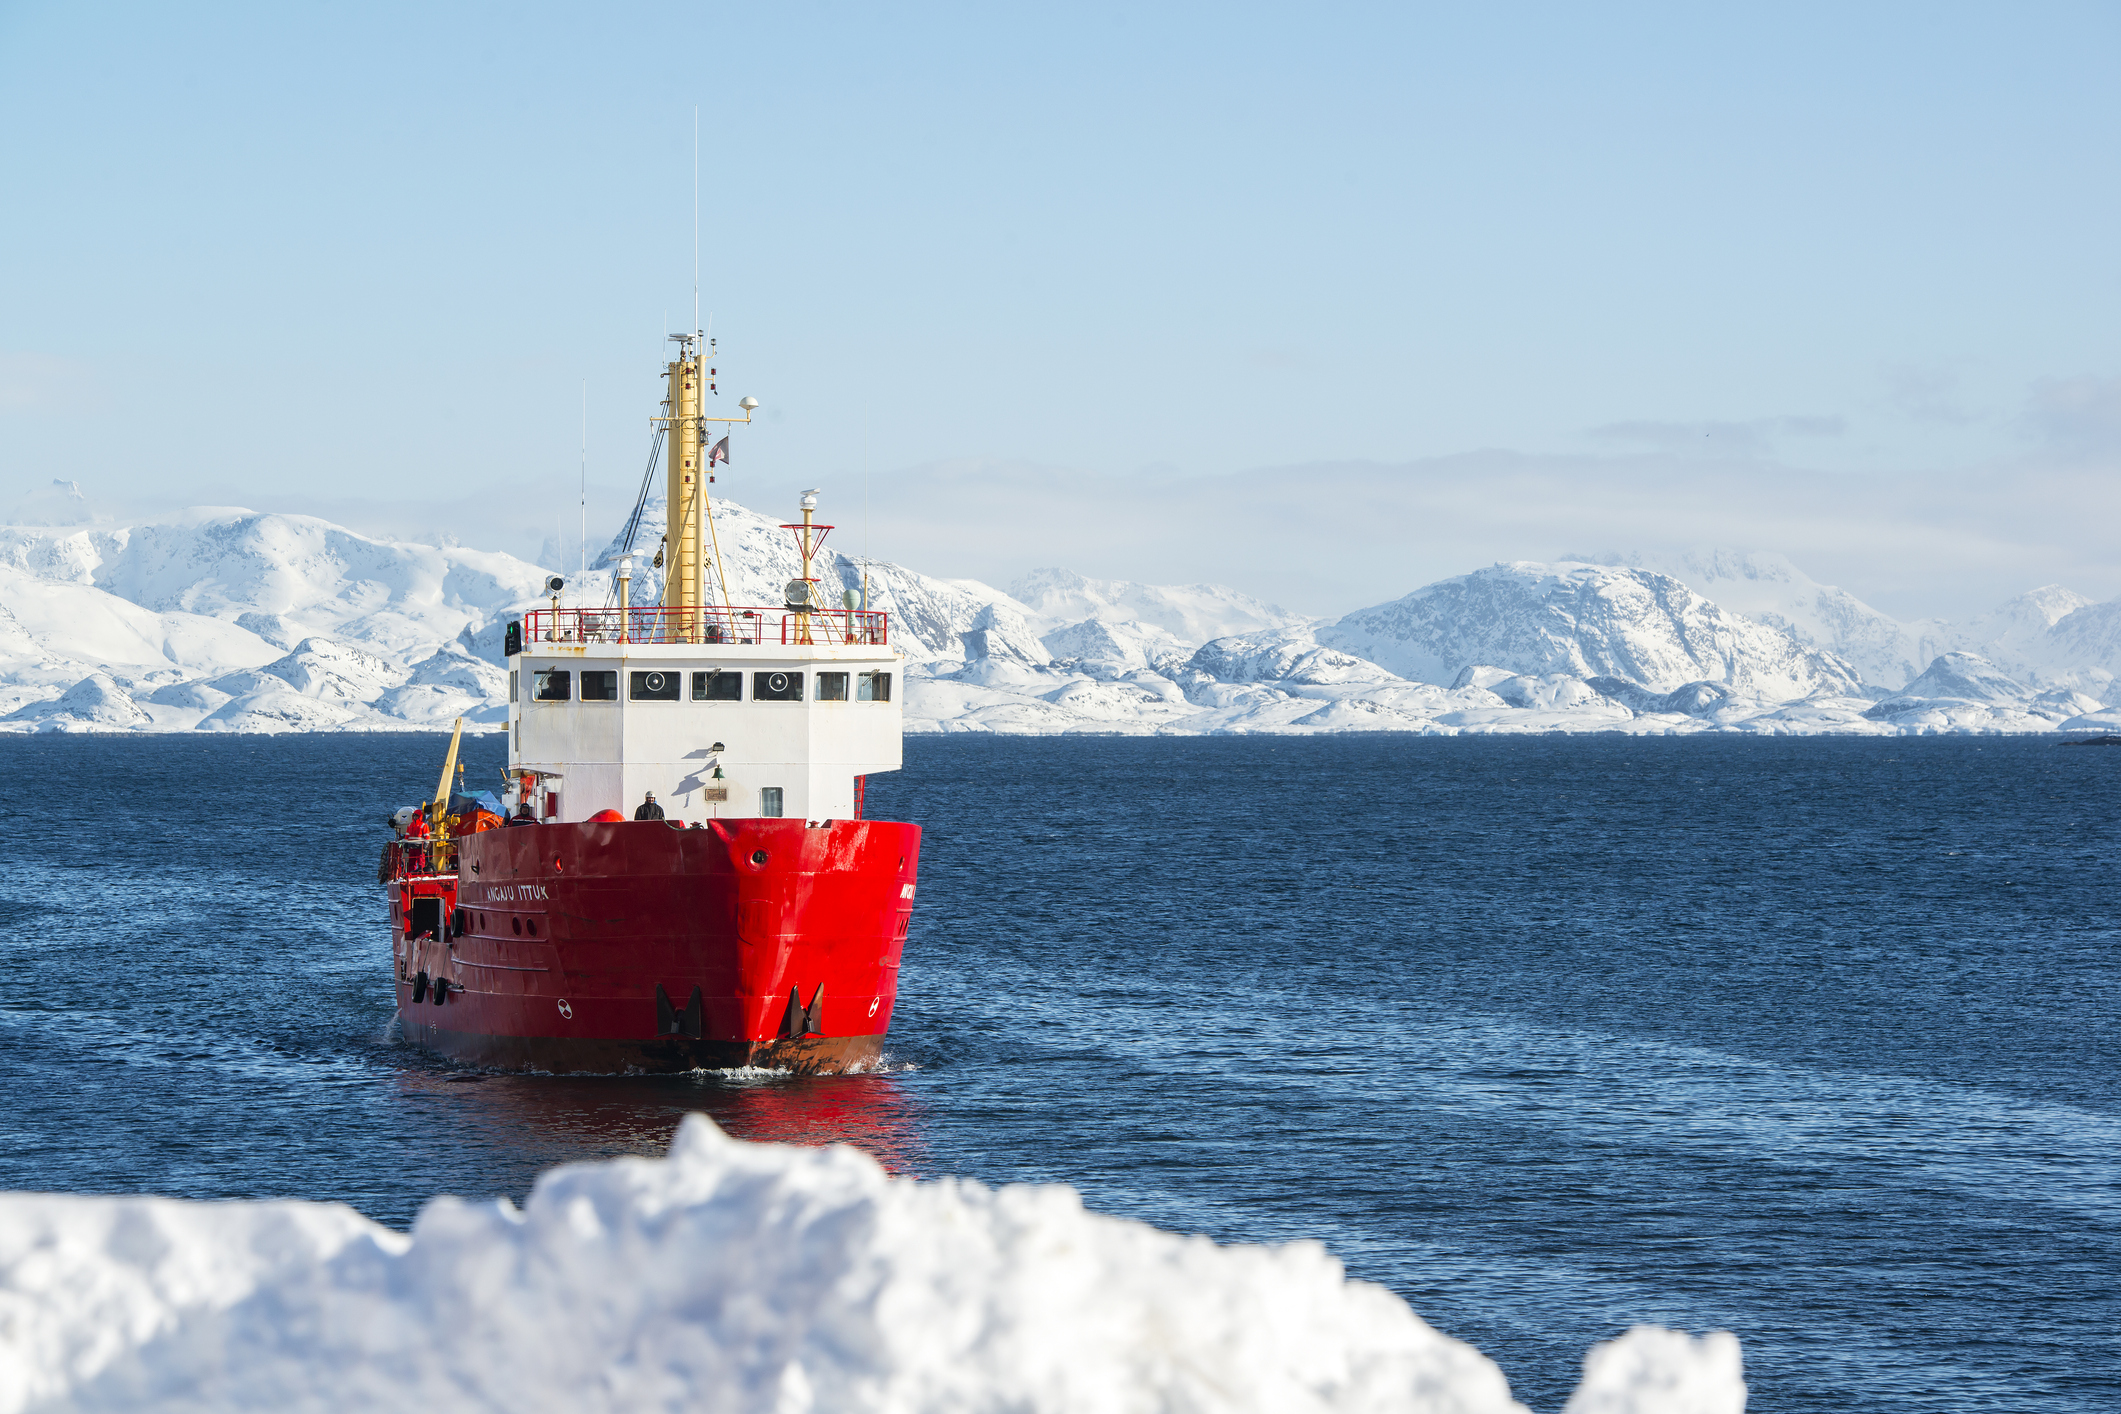 Freight vessel in the arctic sea, Western Greenland